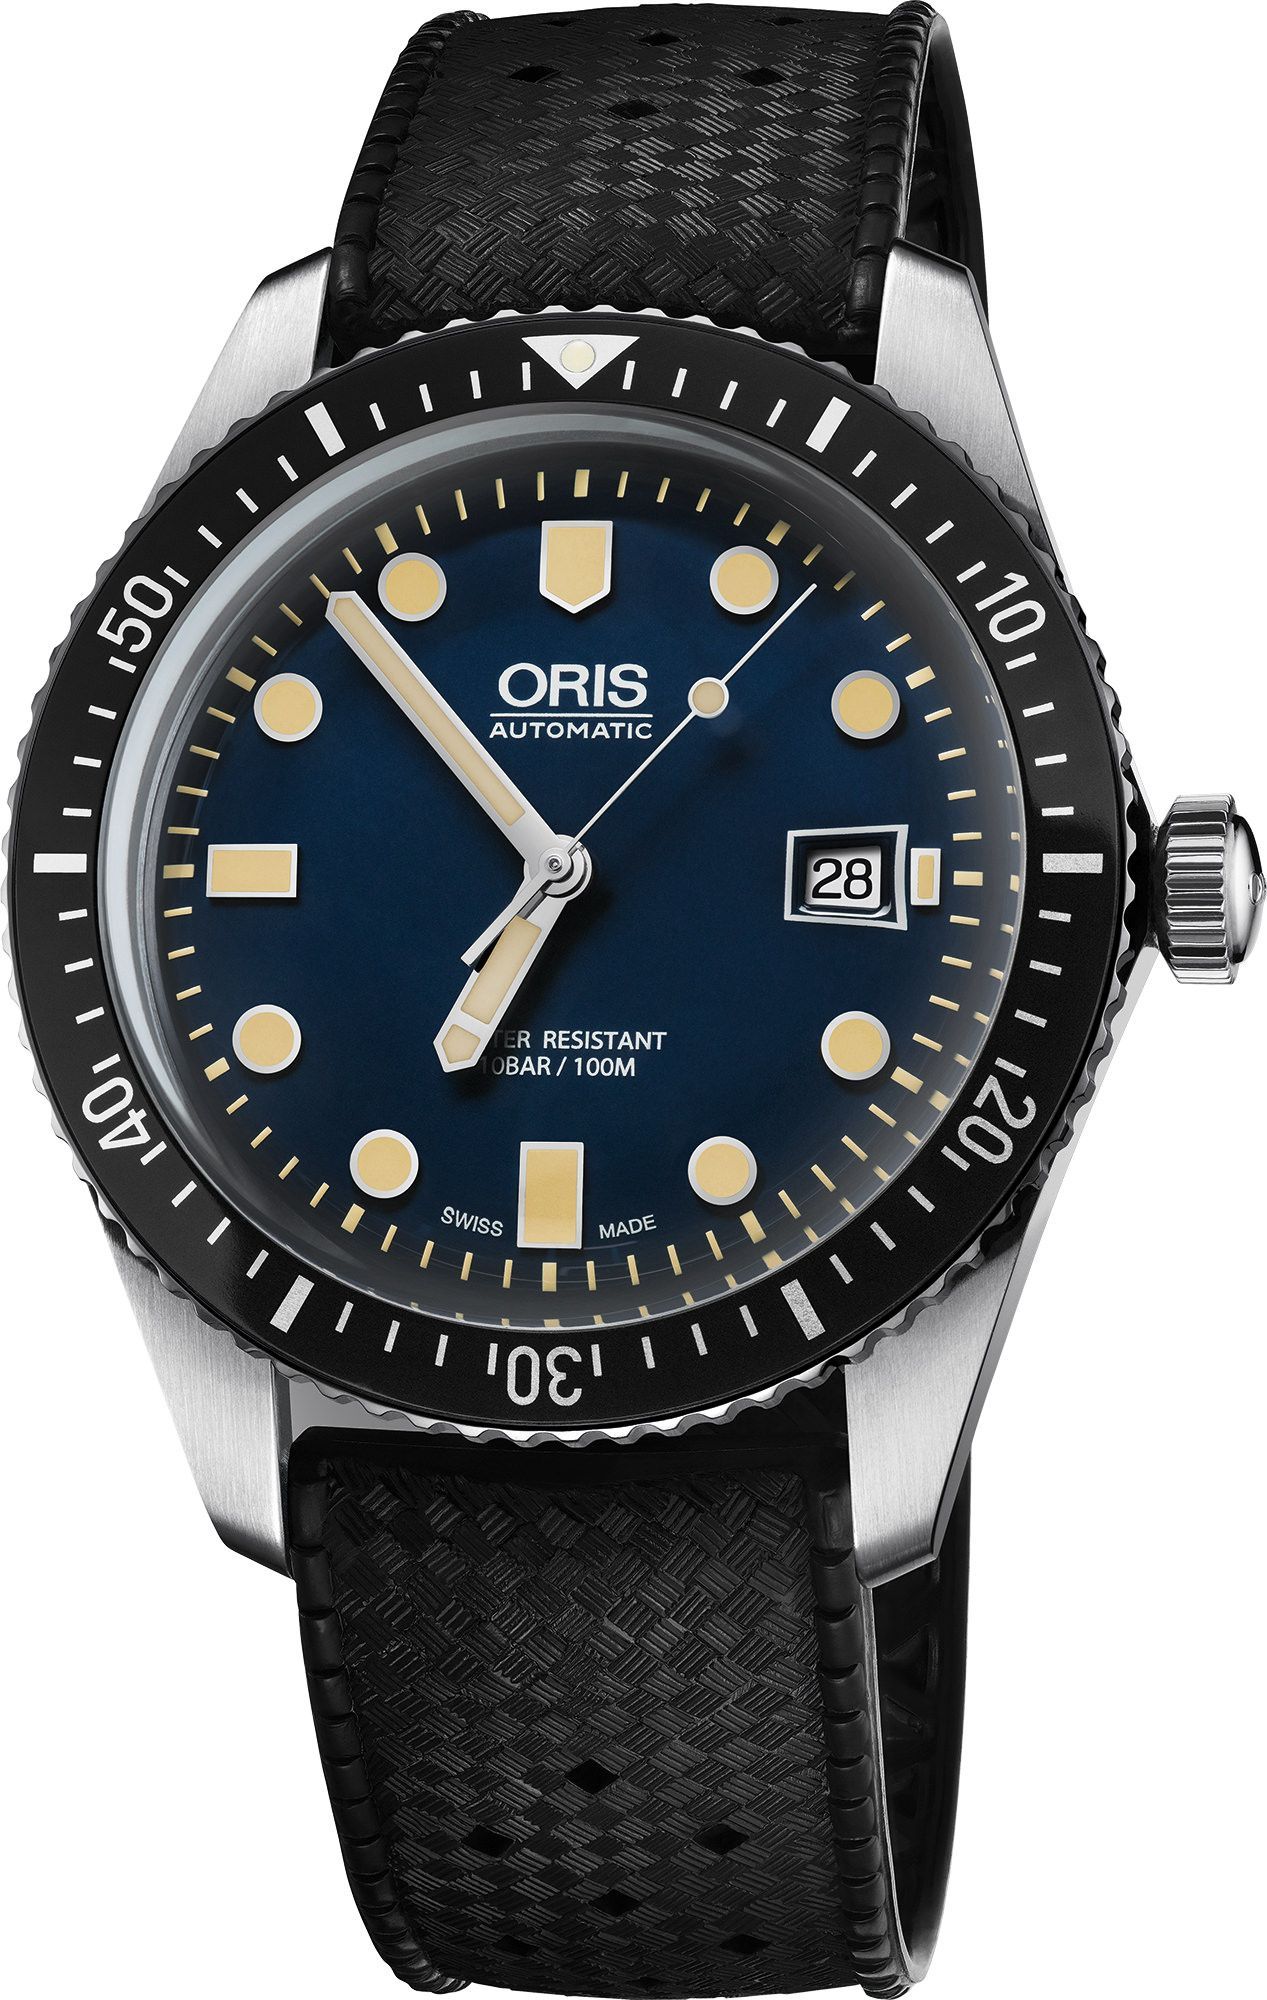 Oris Divers Sixty-Five 42 mm Watch in Blue Dial For Men - 1